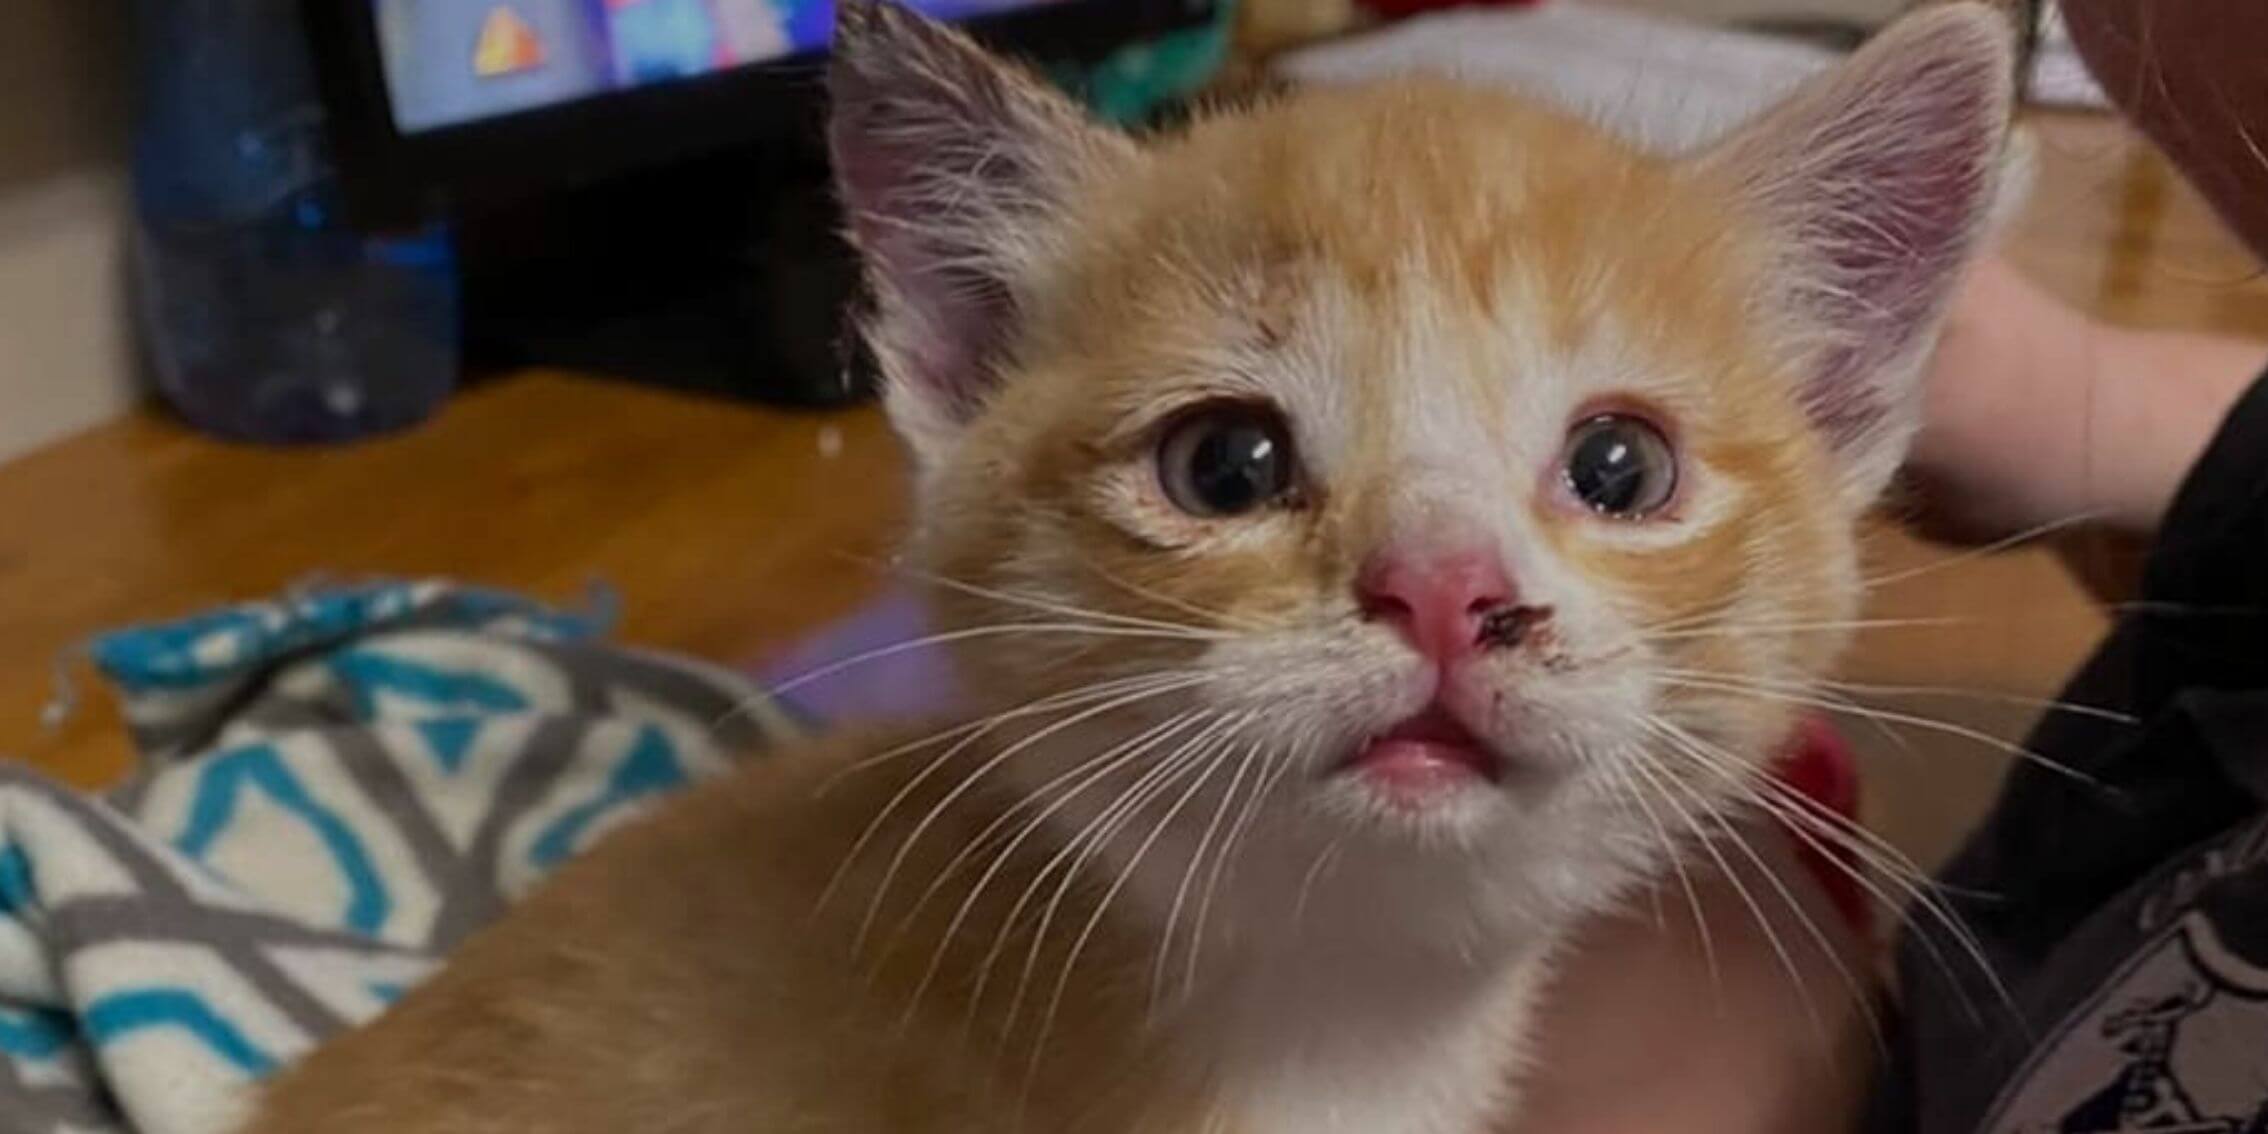 epic kitten rescue gets a second chance